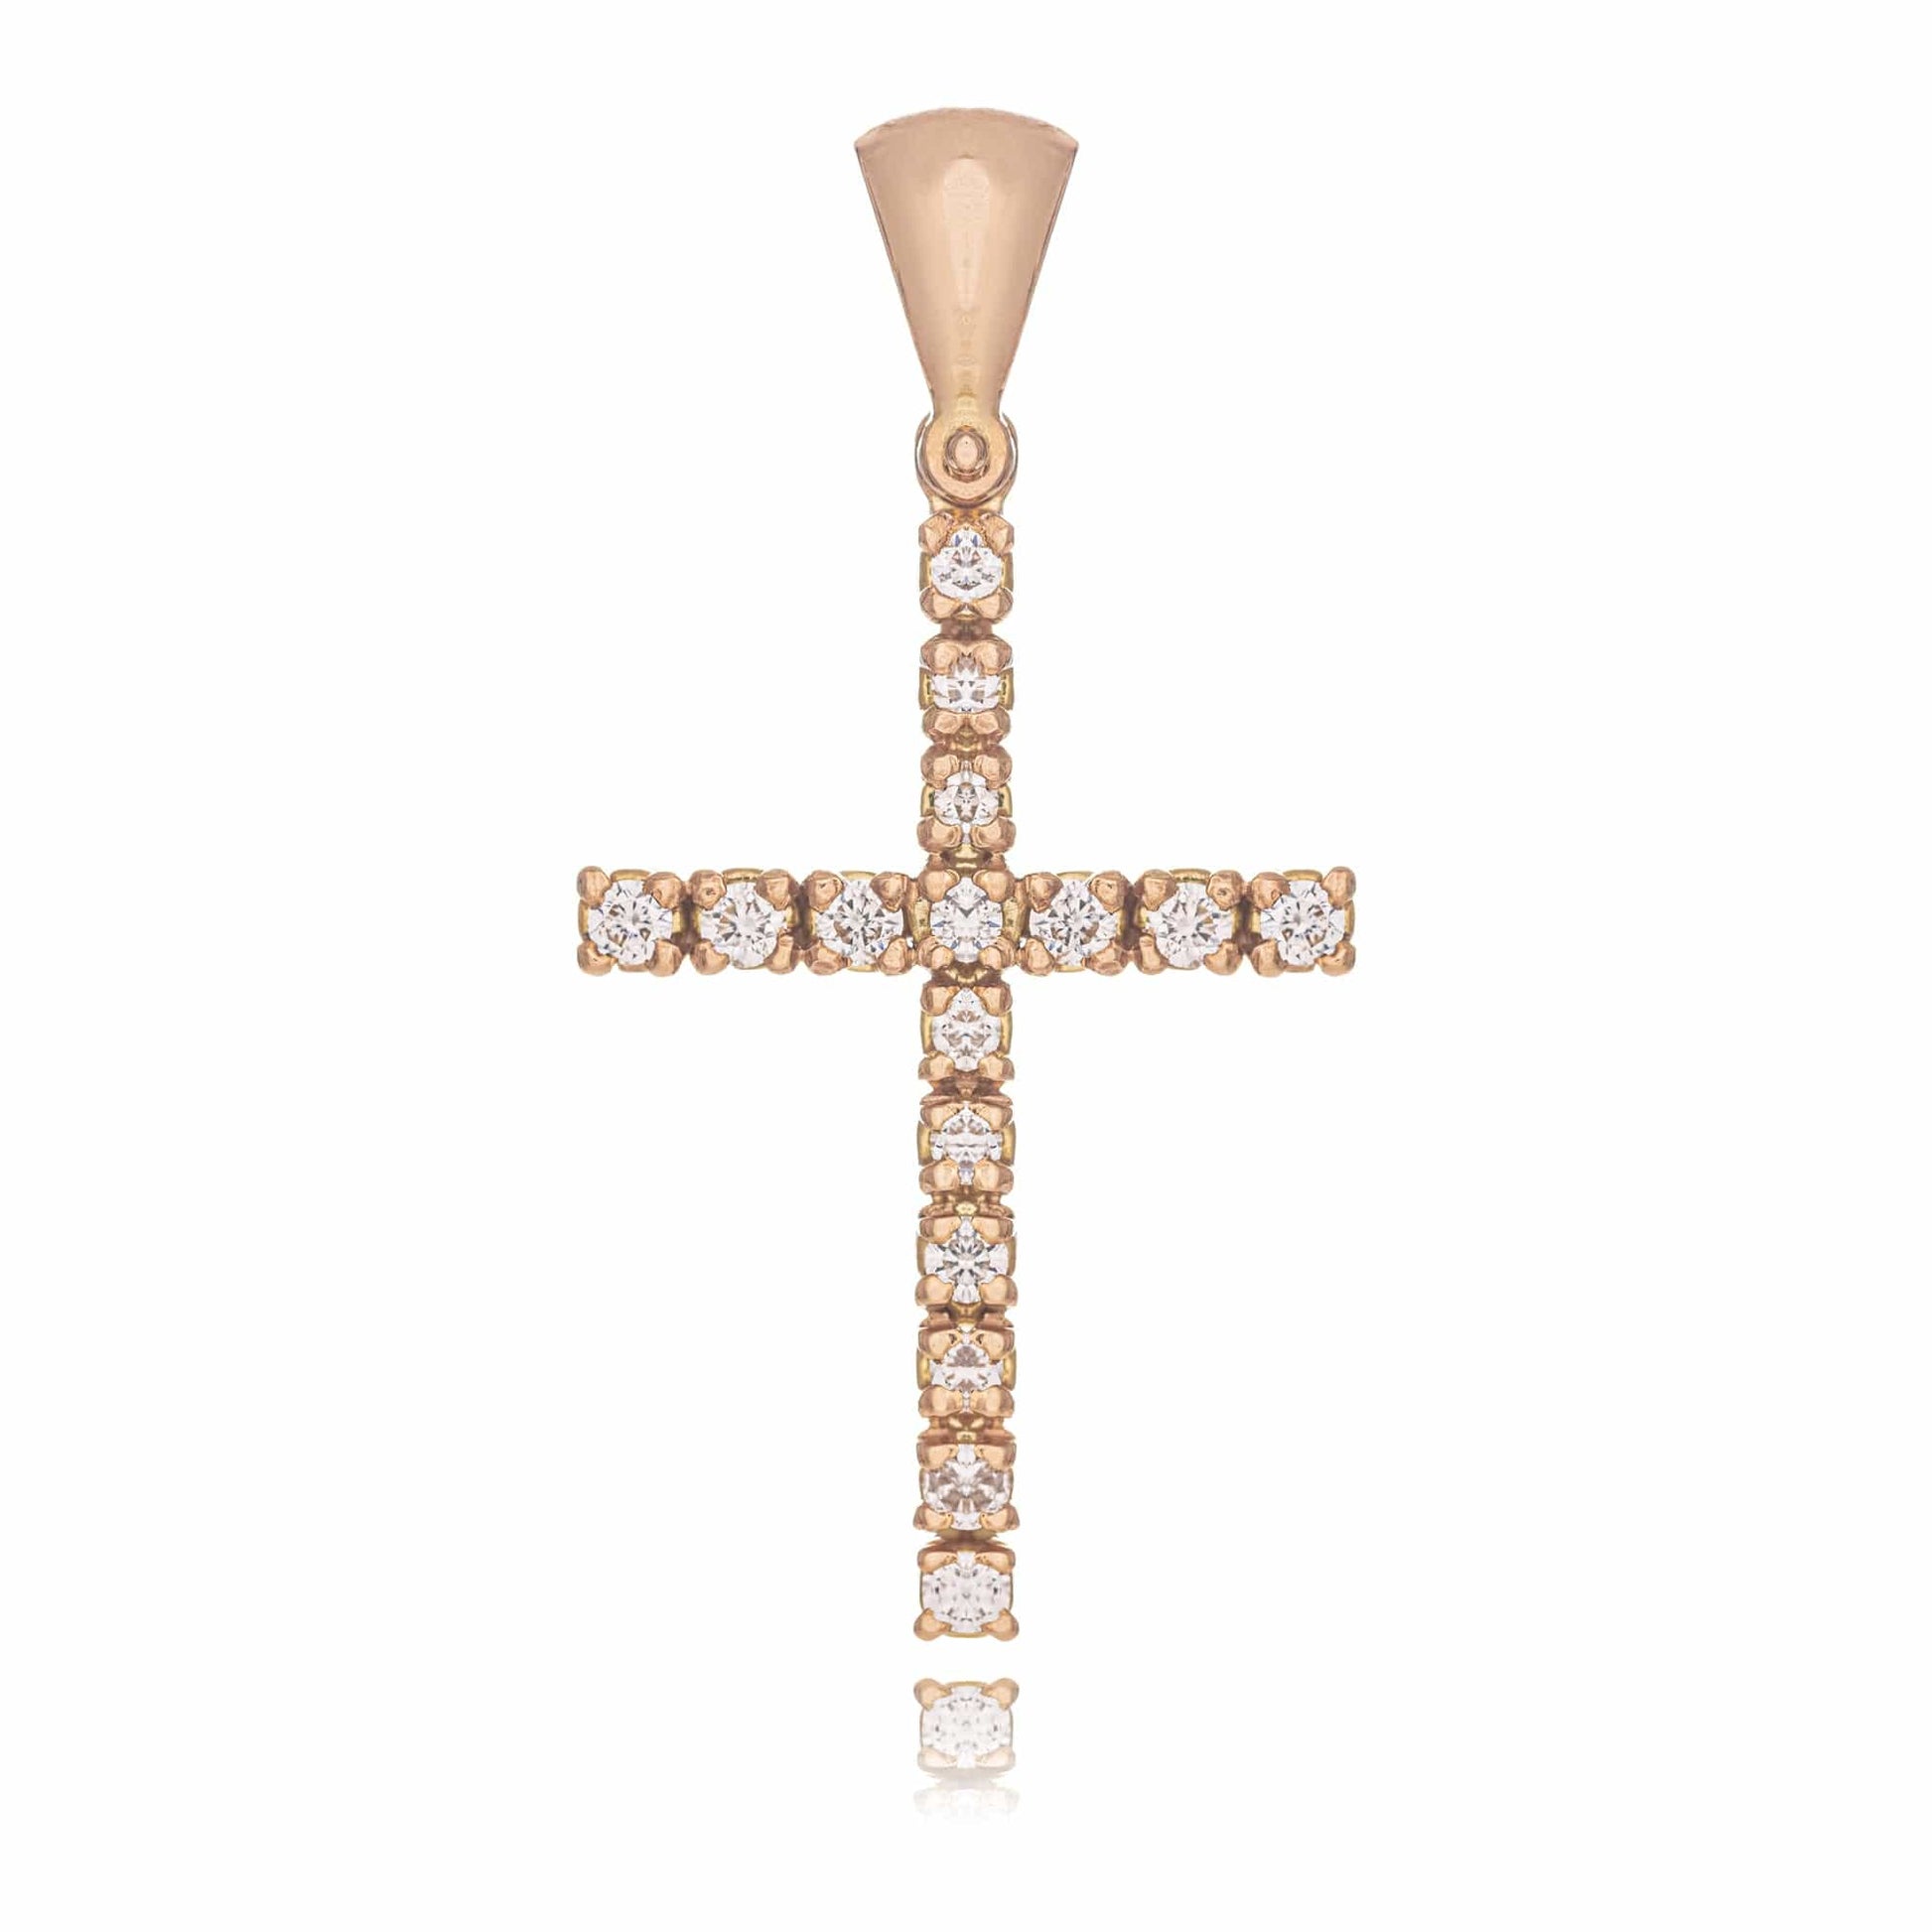 MONDO CATTOLICO Jewelry Cm 2.2 (0.86 in) / Cm 1.4 (0.55 in) Pink Gold Cross with Diamonds